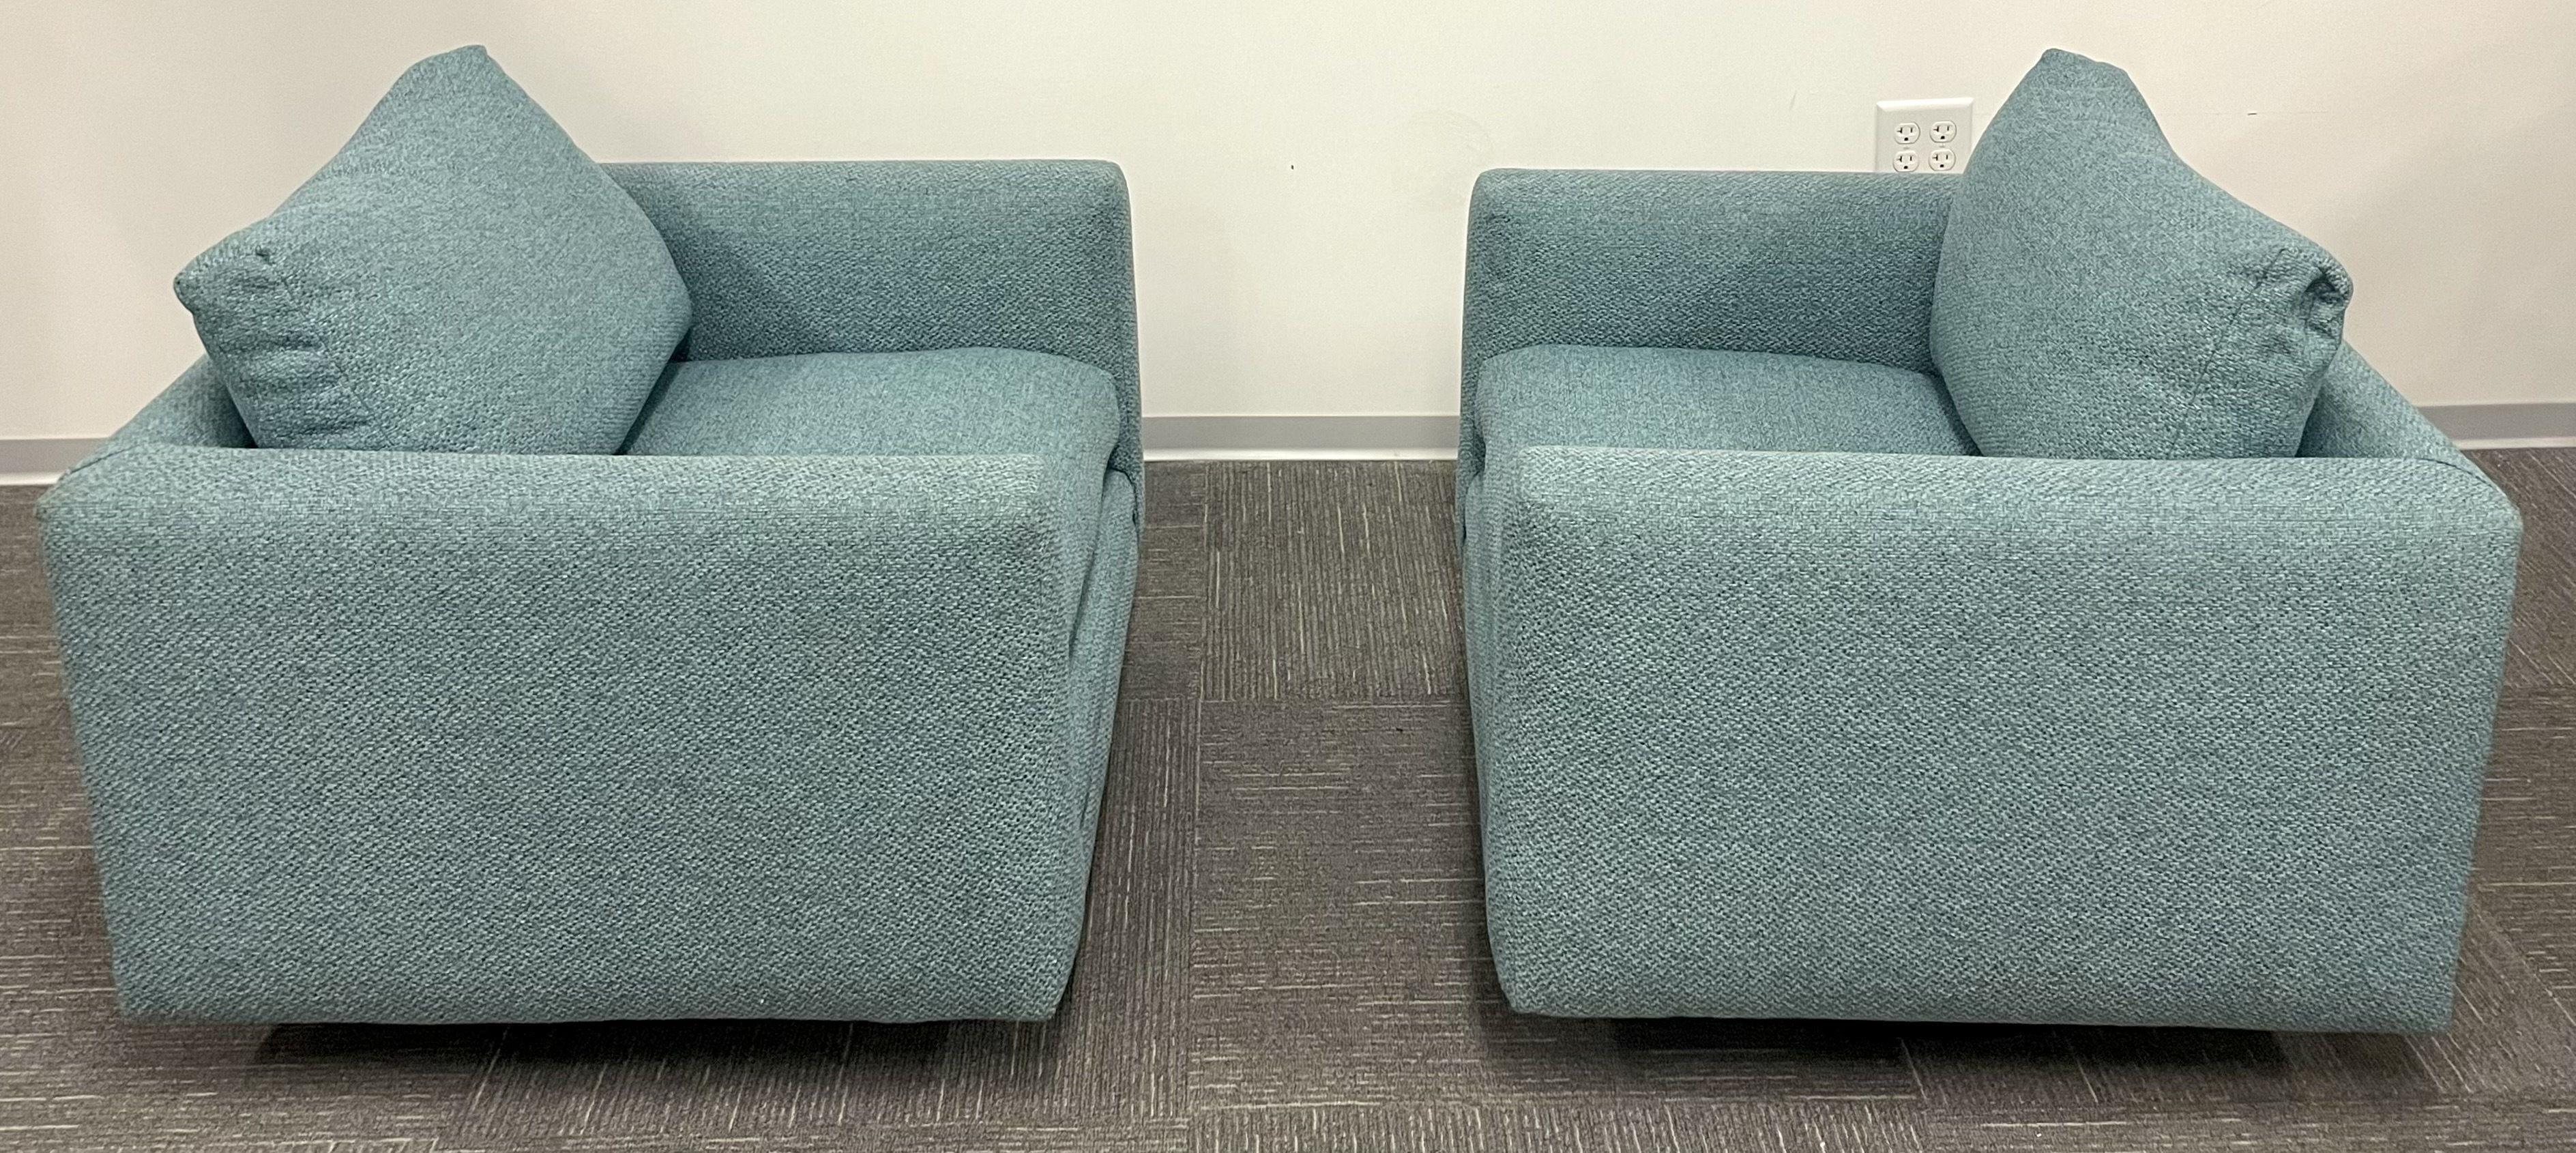 Textile Pair Teal Milo Baughman Style Mid-Century Modern Lounge Chairs, Swivel, Square For Sale